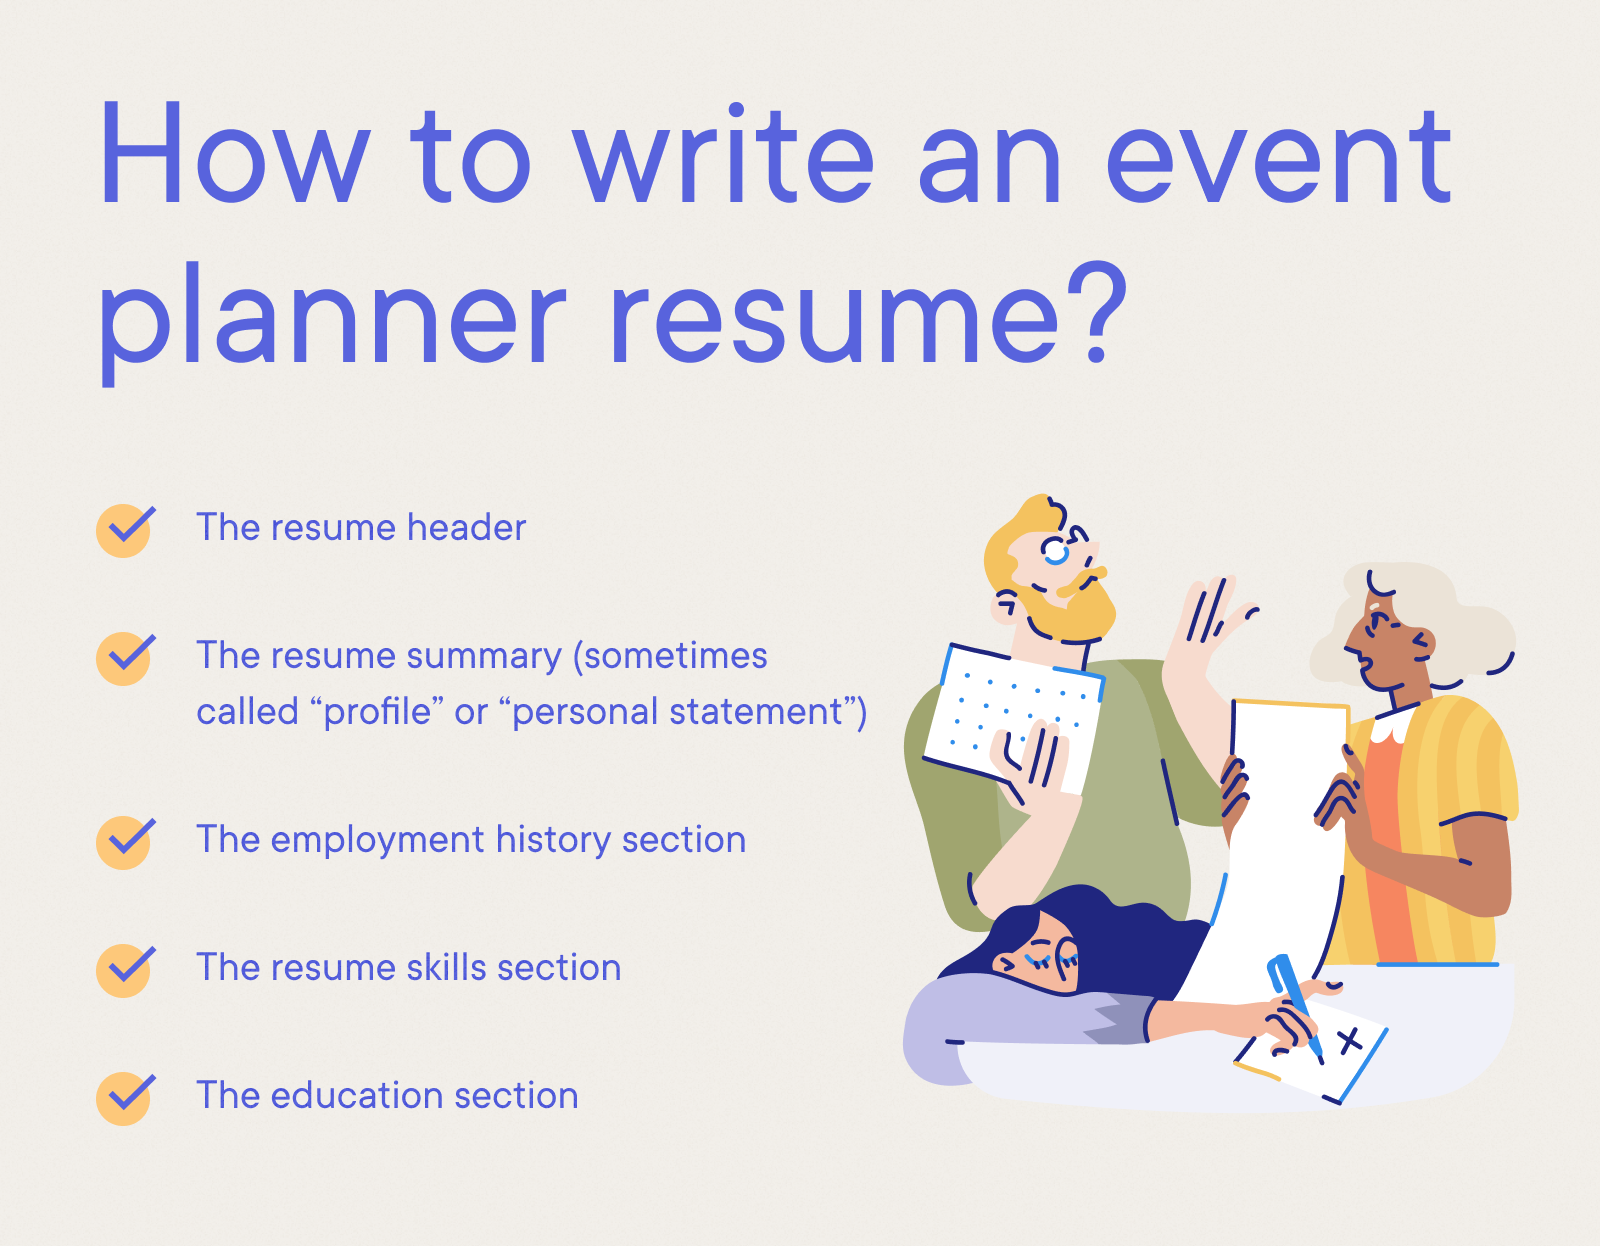 Event Planner - How to write an  event planner resume?